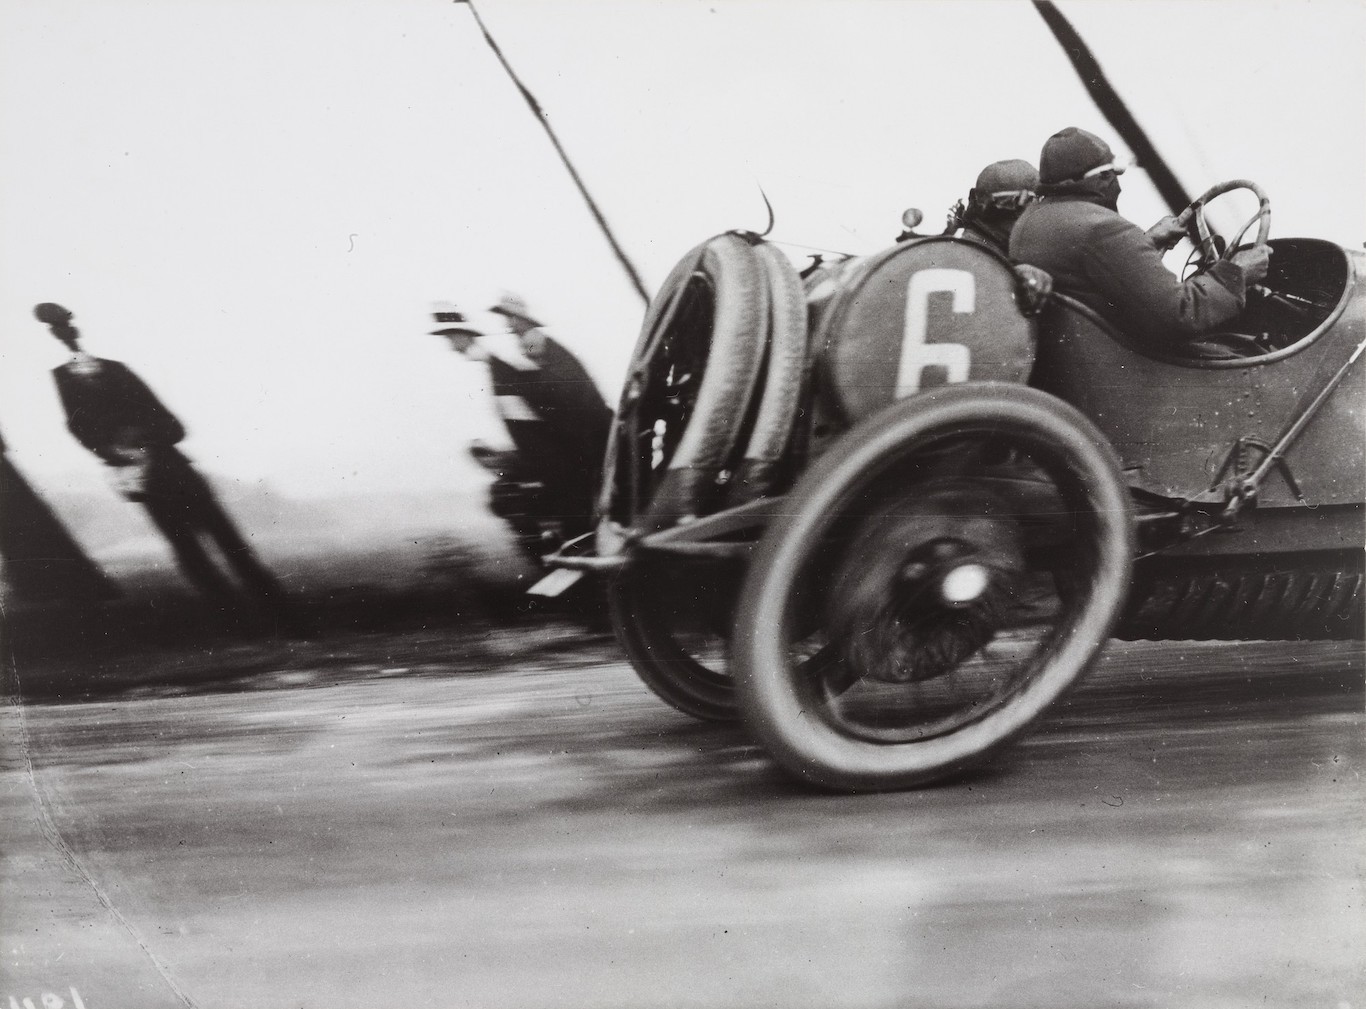 Jacques-Henri_Lartigue_Grand_Prix_of_the_Automobile_Club_of_France_Course_at_Dieppe_1912_from_MoMA.jpg